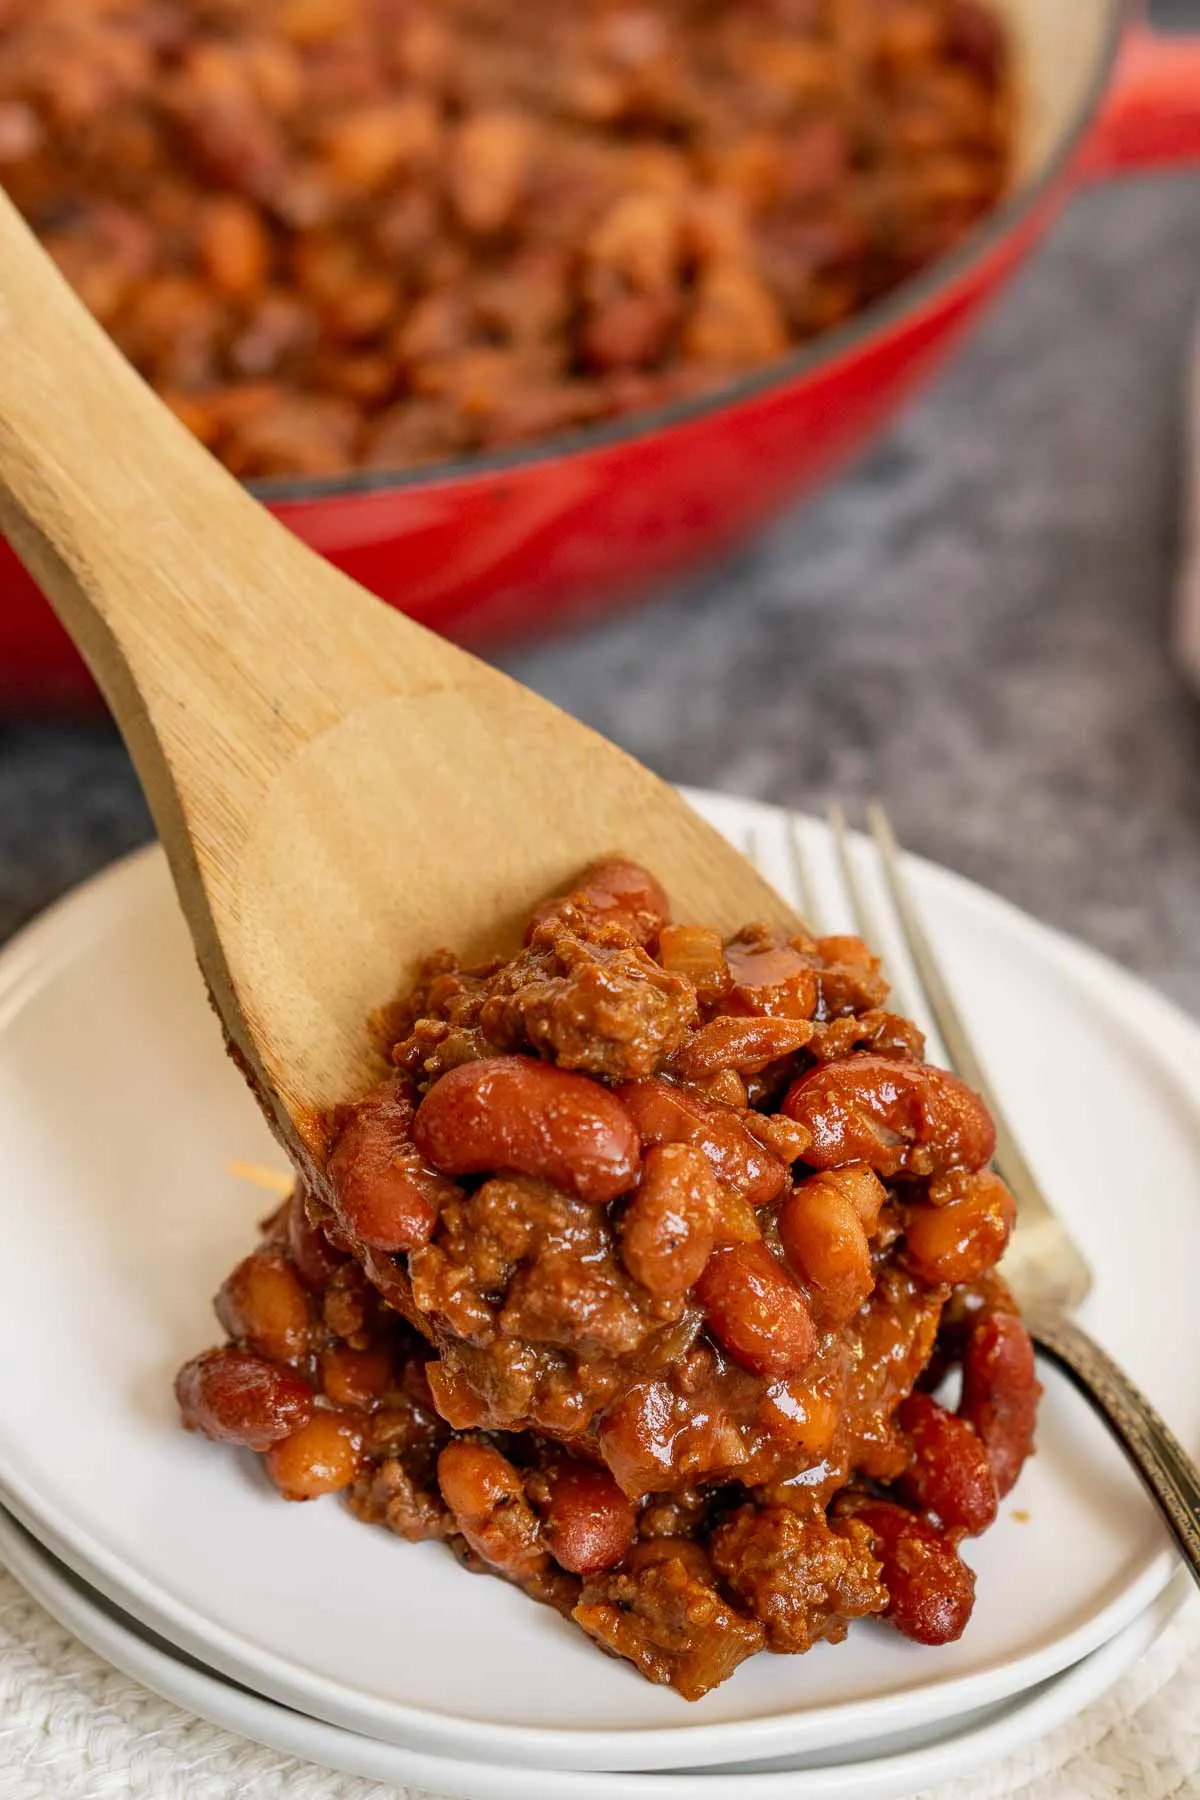 Adding baked beans with ground beef to a plate